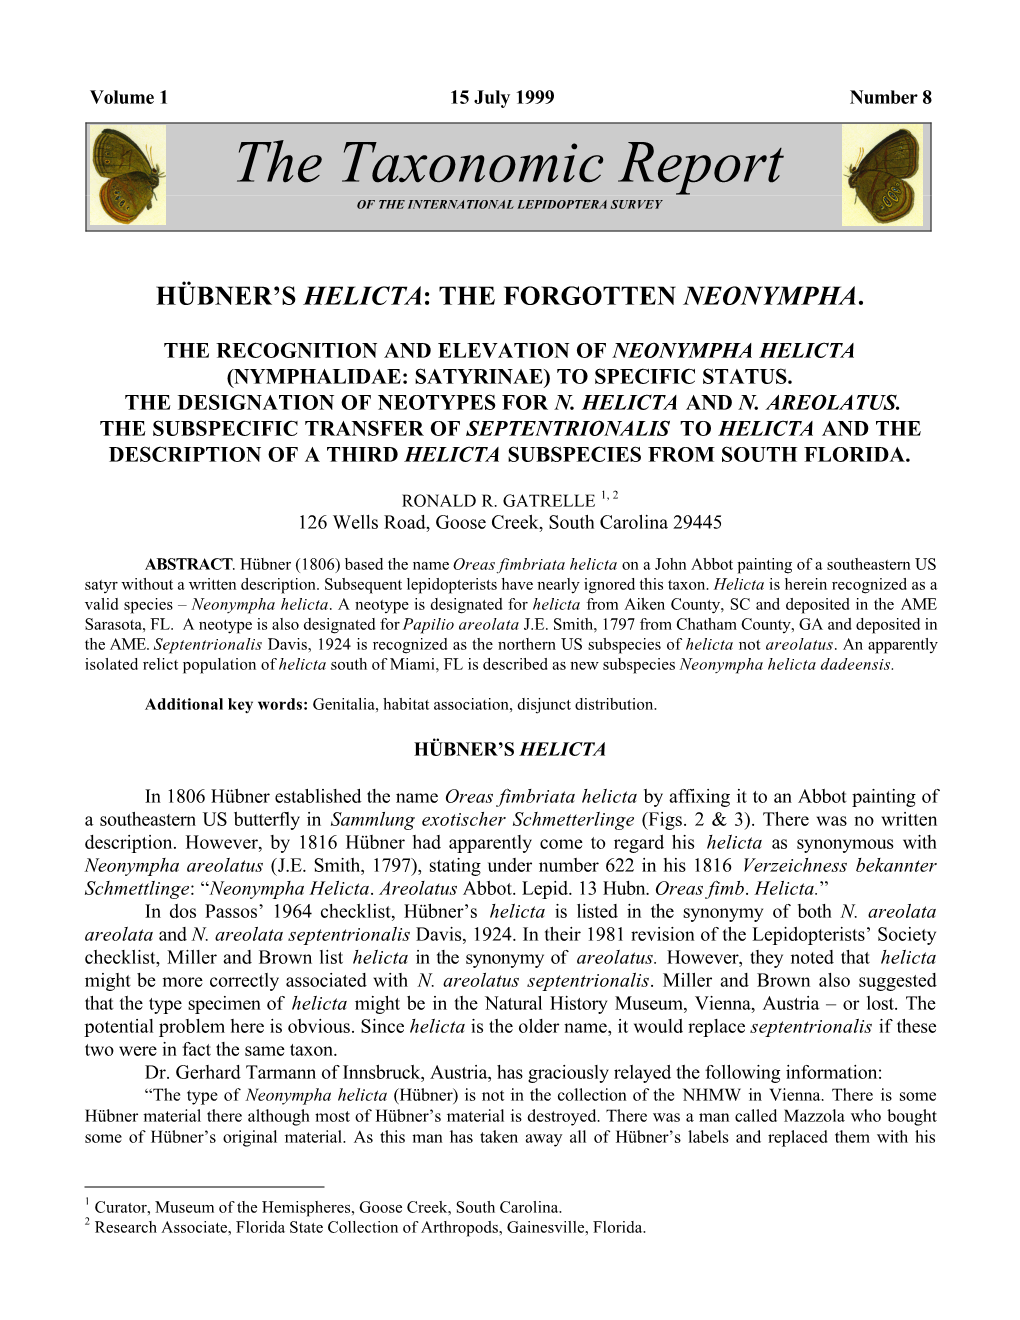 The Taxonomic Report of the INTERNATIONAL LEPIDOPTERA SURVEY